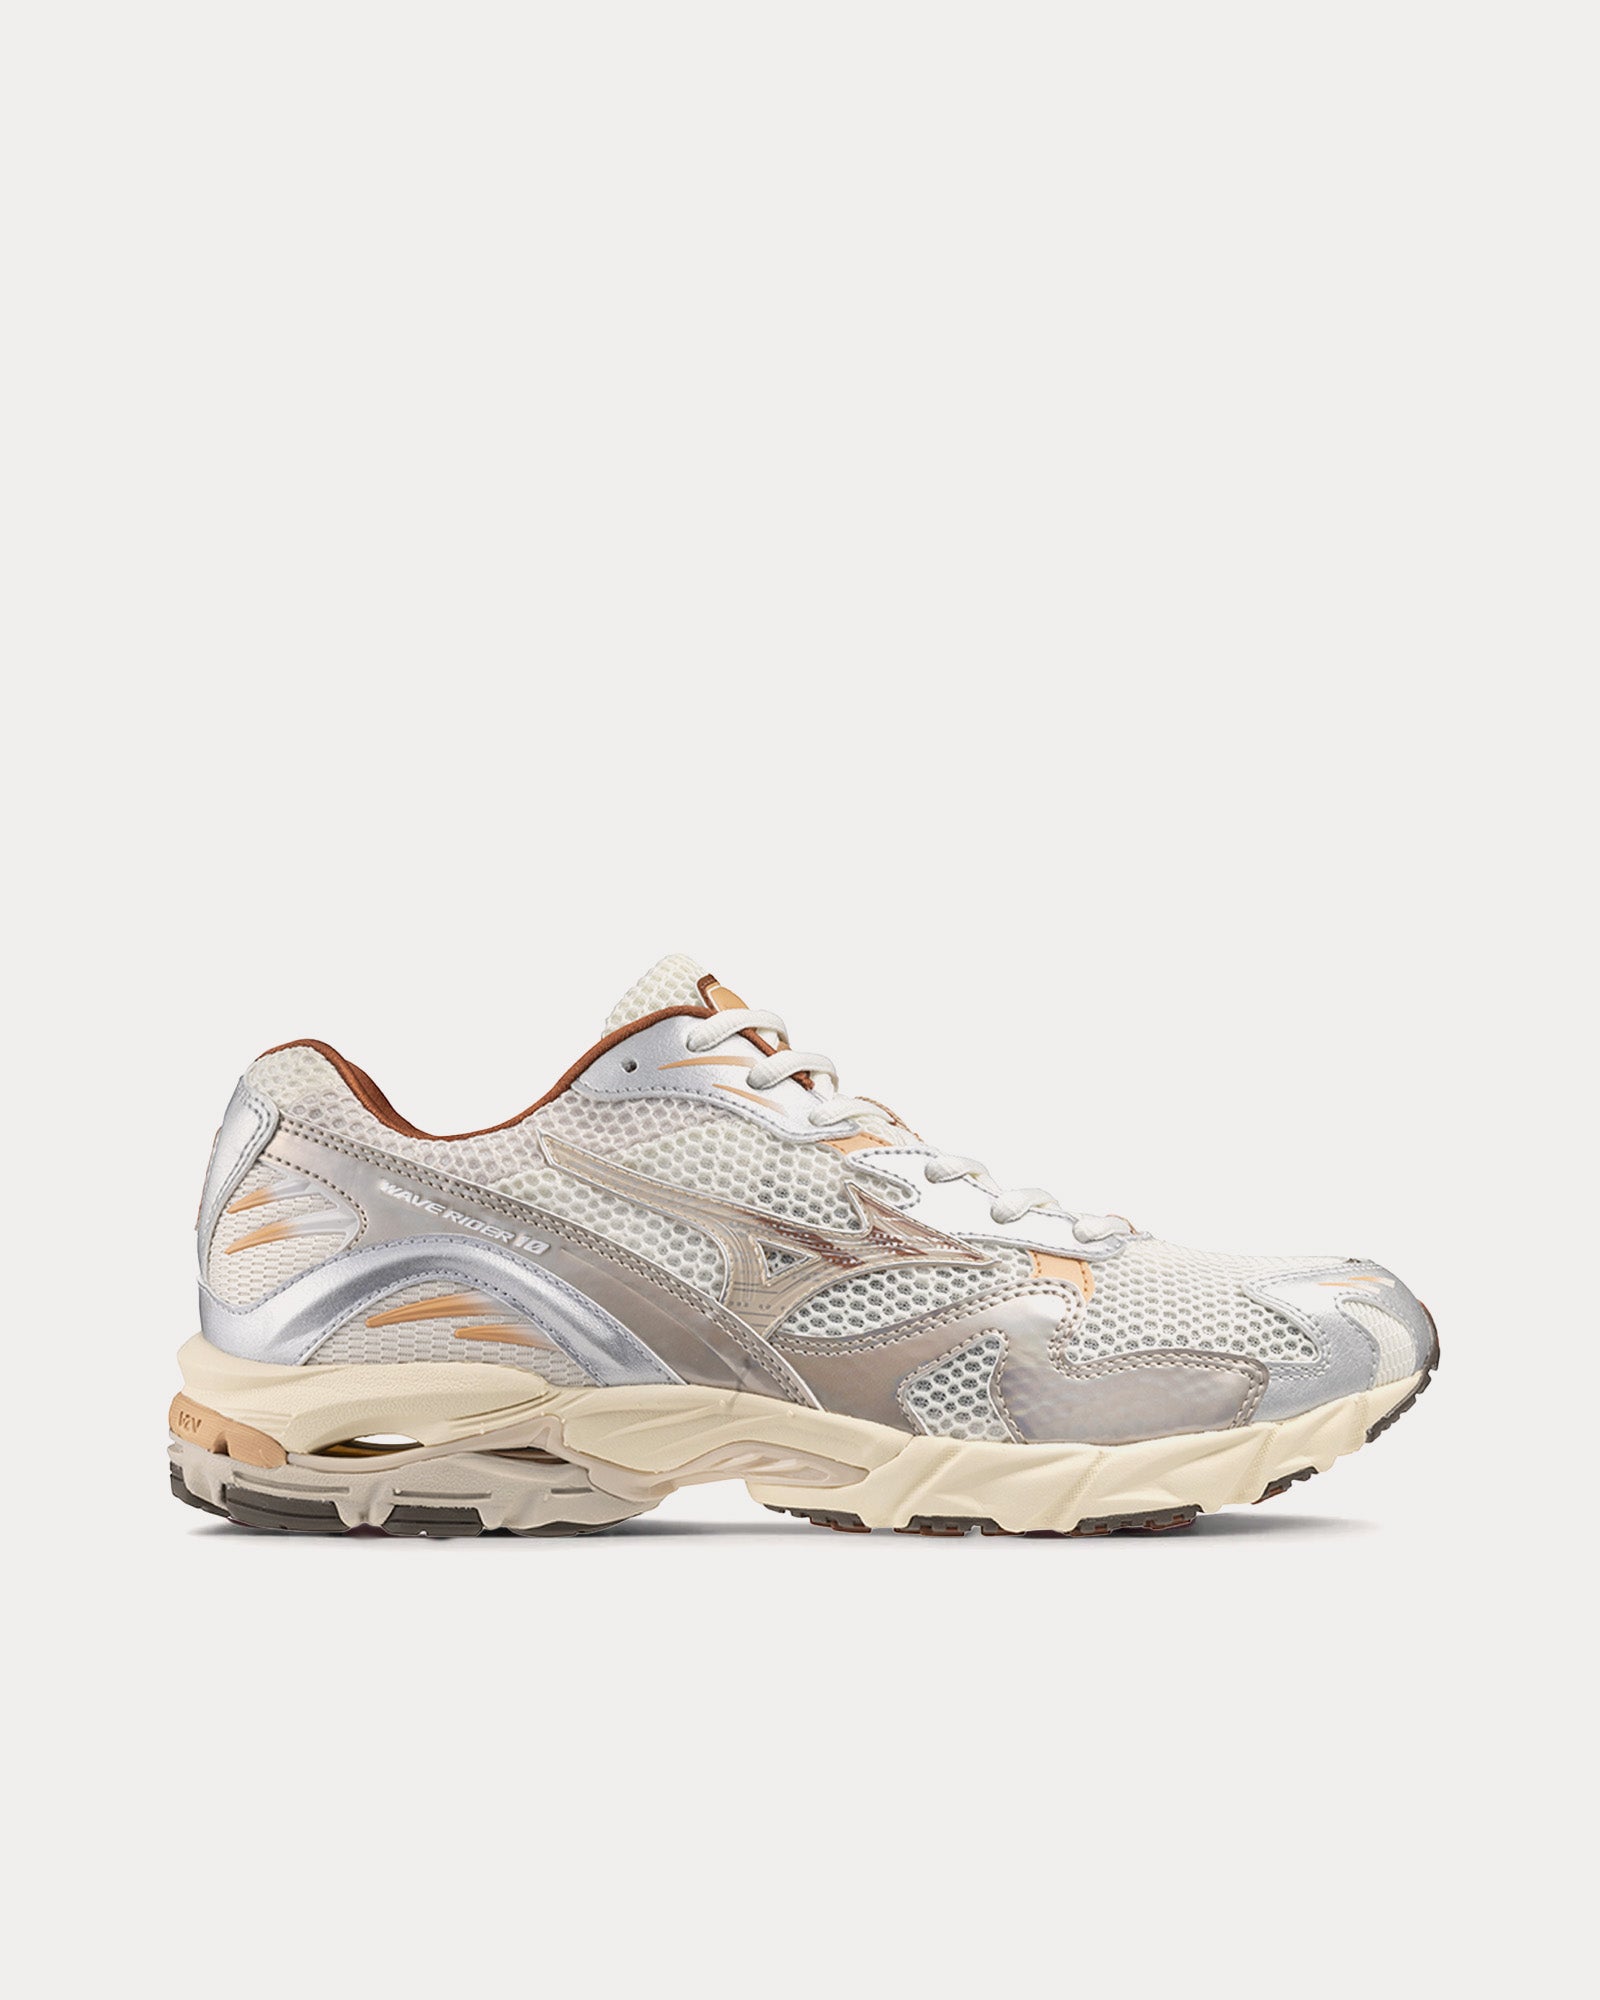 Mizuno - Wave Rider 10 Shifting Sand / Shifting Sand / Snow White Low Top Sneakers